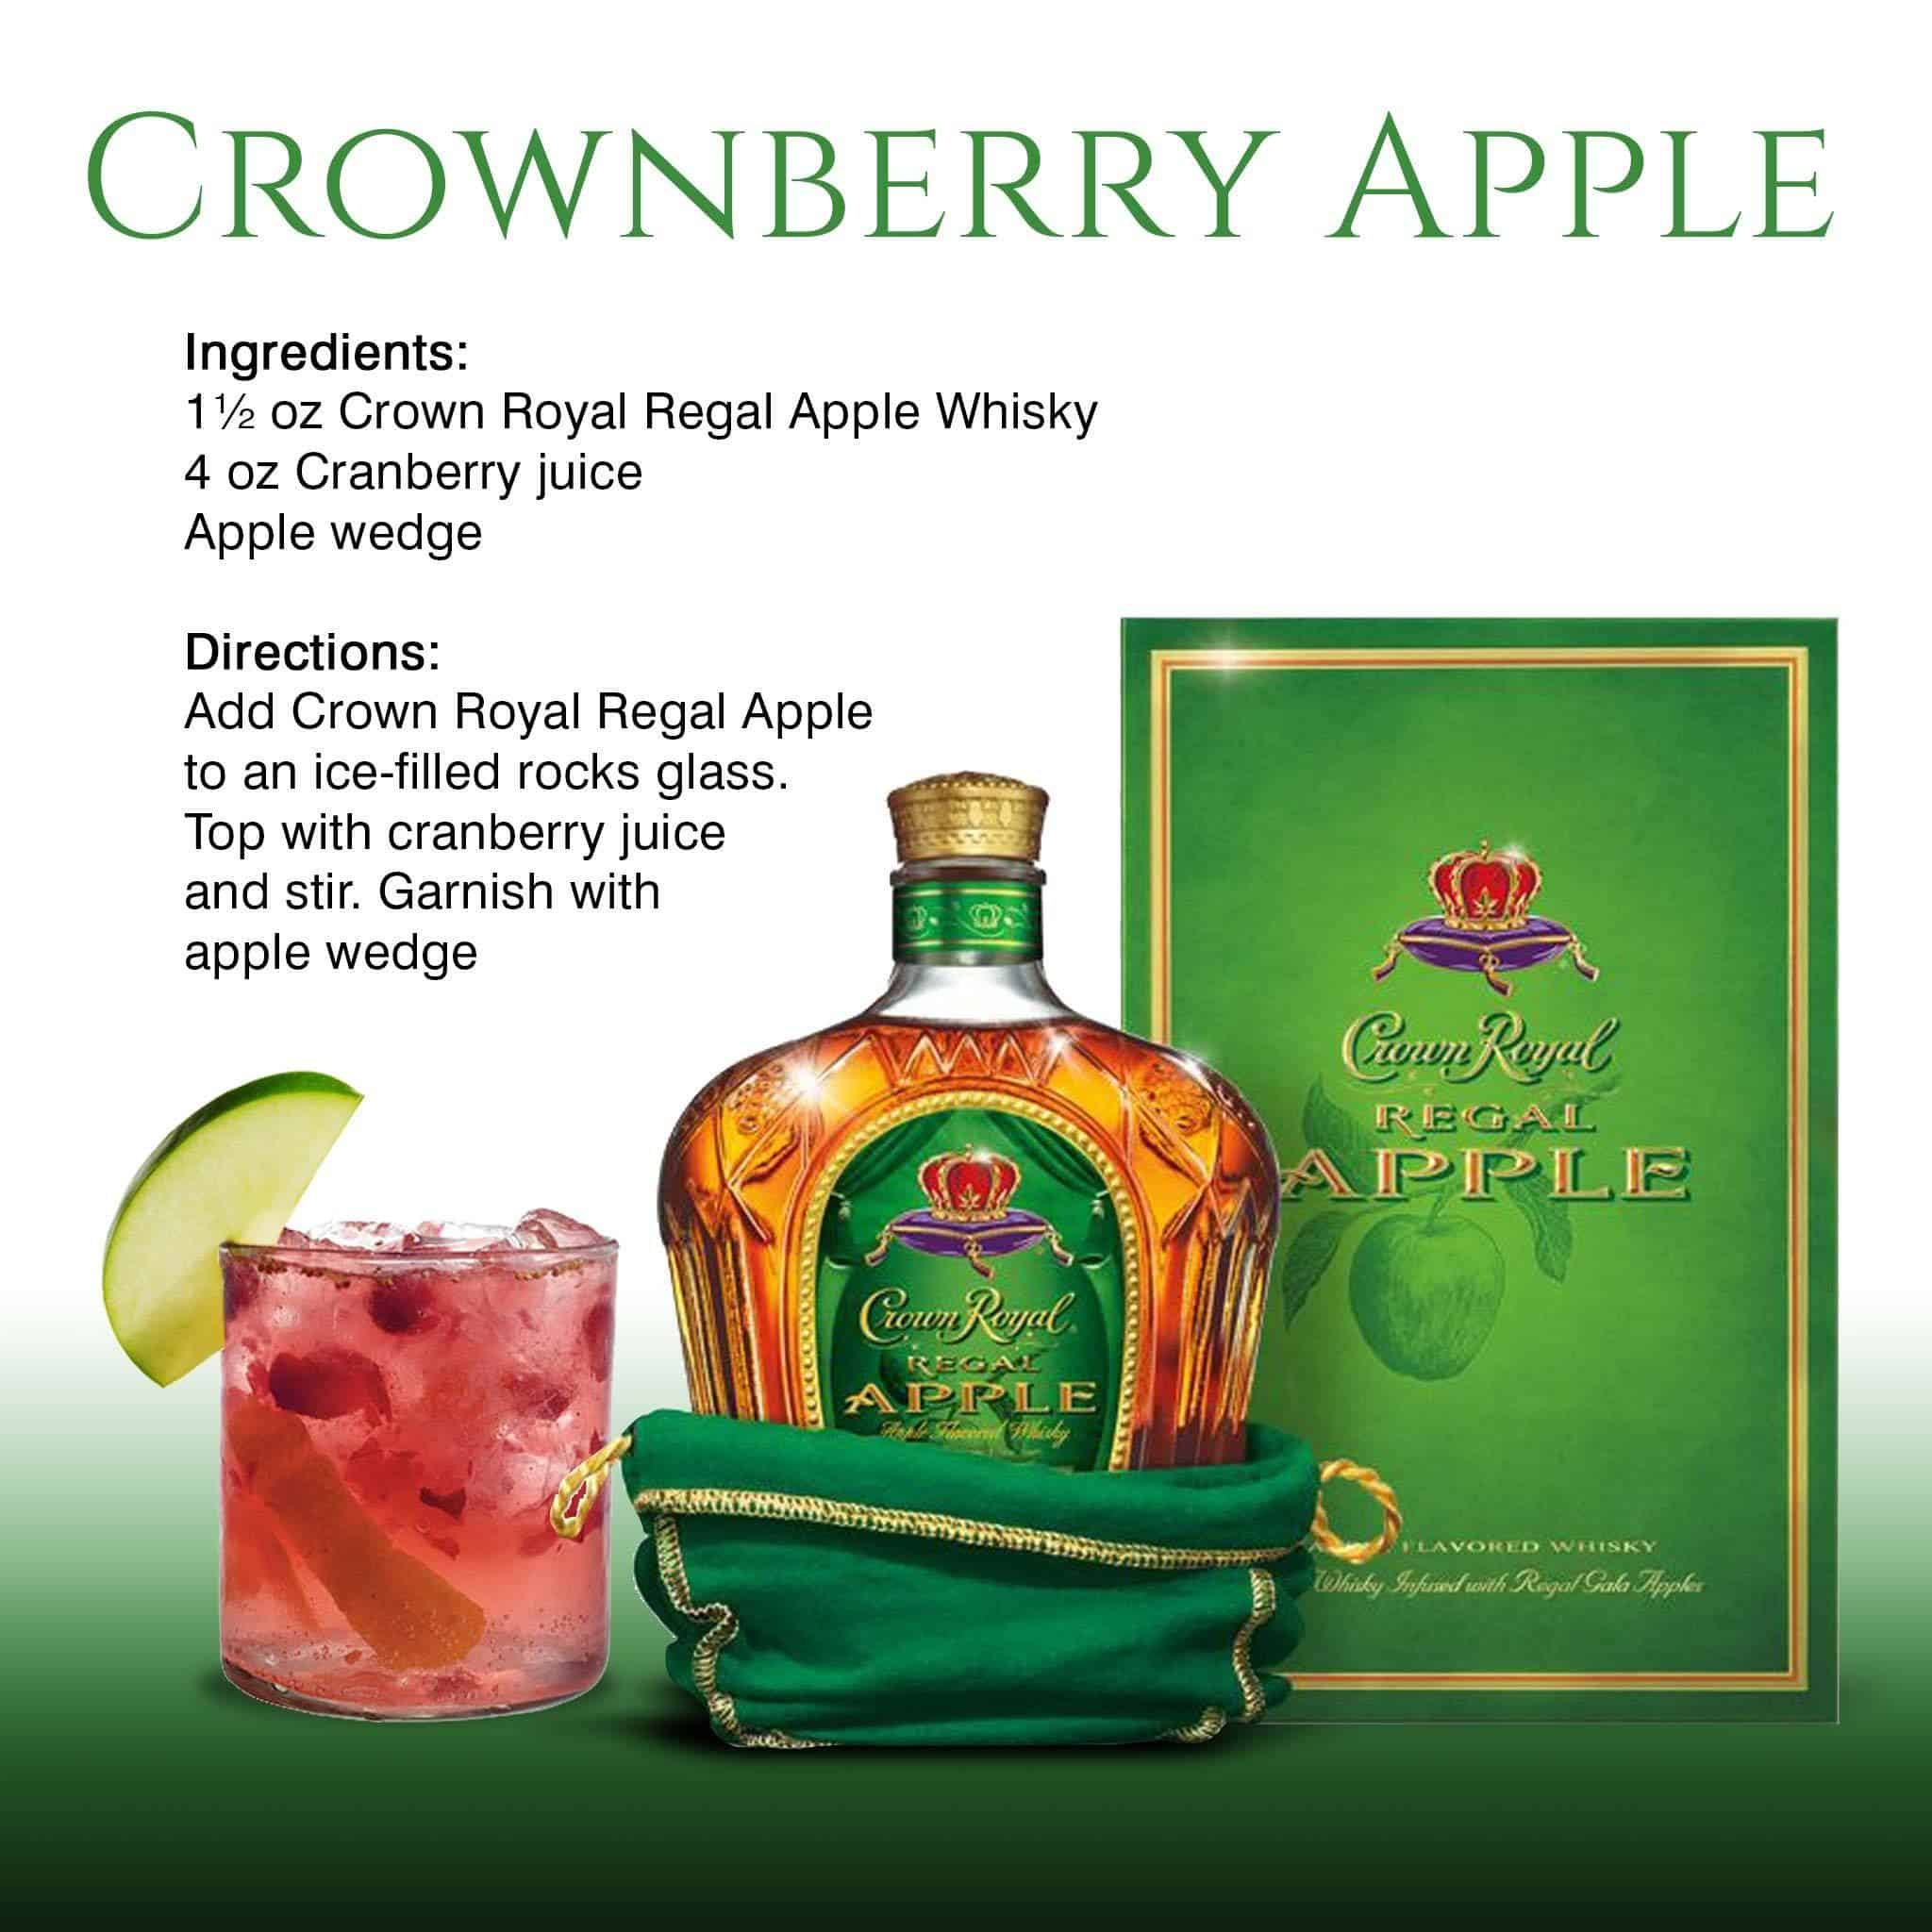 Crownberry Apple recipe featuring Crown Royal Regal Apple